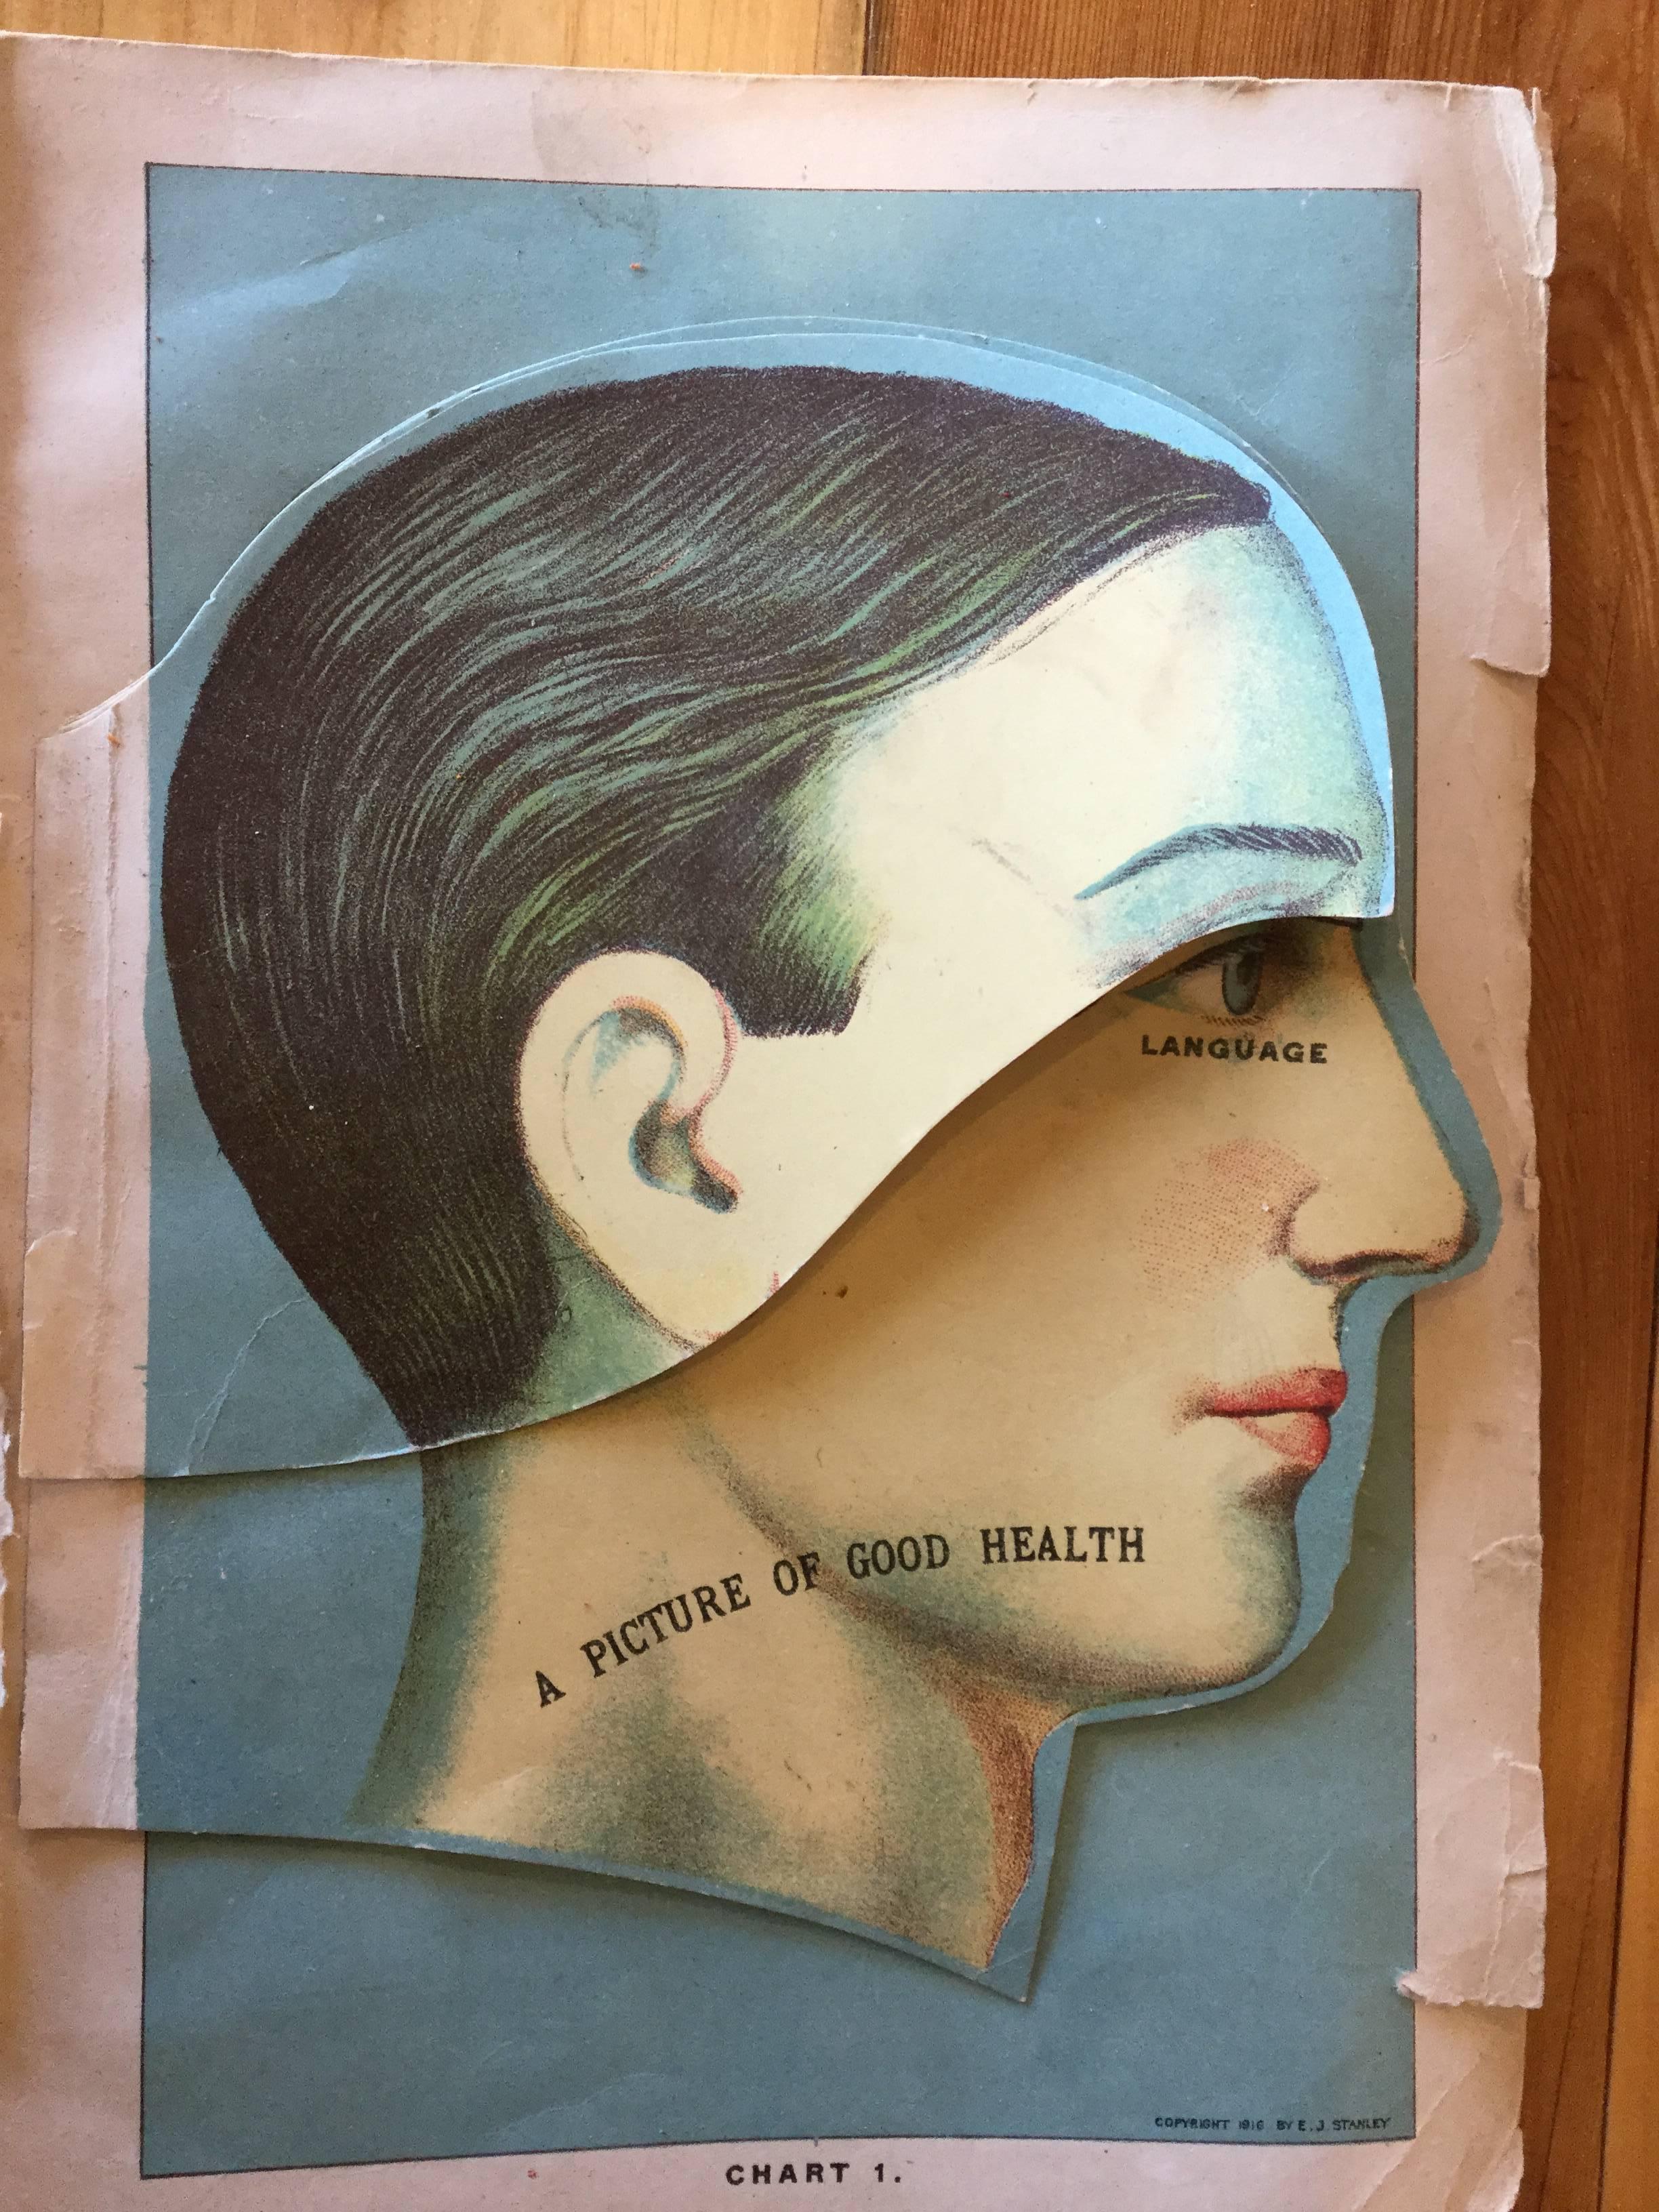 Great looking phrenology chart. The chart has several layers of anatomical detail that fold over each other. The first one starts with outside features and as you turn it the inside features are represented with great graphics and color.